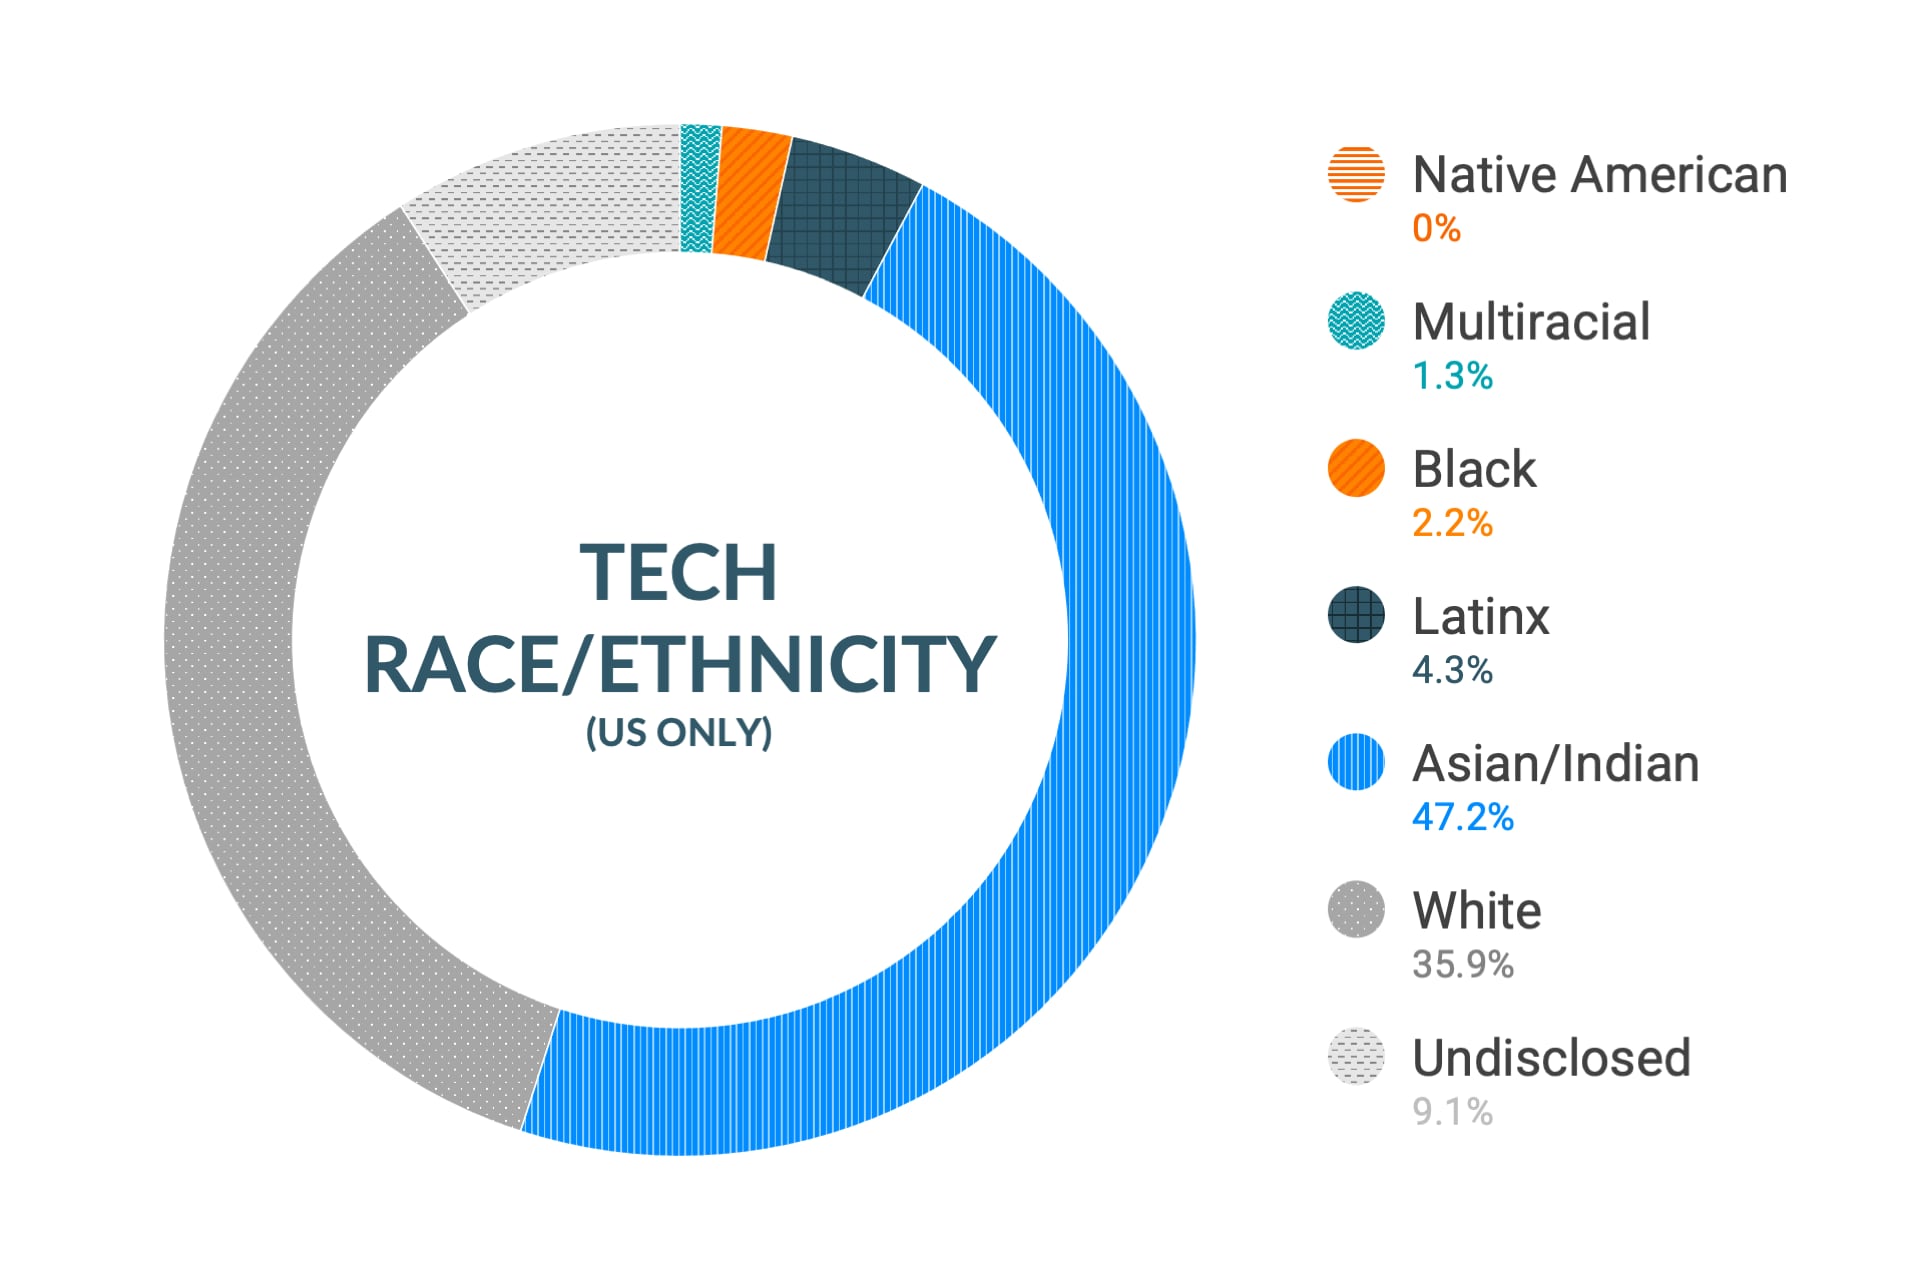 Cloudera Diversity and Inclusion data for Race and Ethnicity in U.S. Technical and Engineering Roles: Native American 0%, Multiracial 1.8%, Black 2.0%, Latinx 3.6%, Asian and Indian 46.3%, White 36.2%, Undisclosed 10.1%